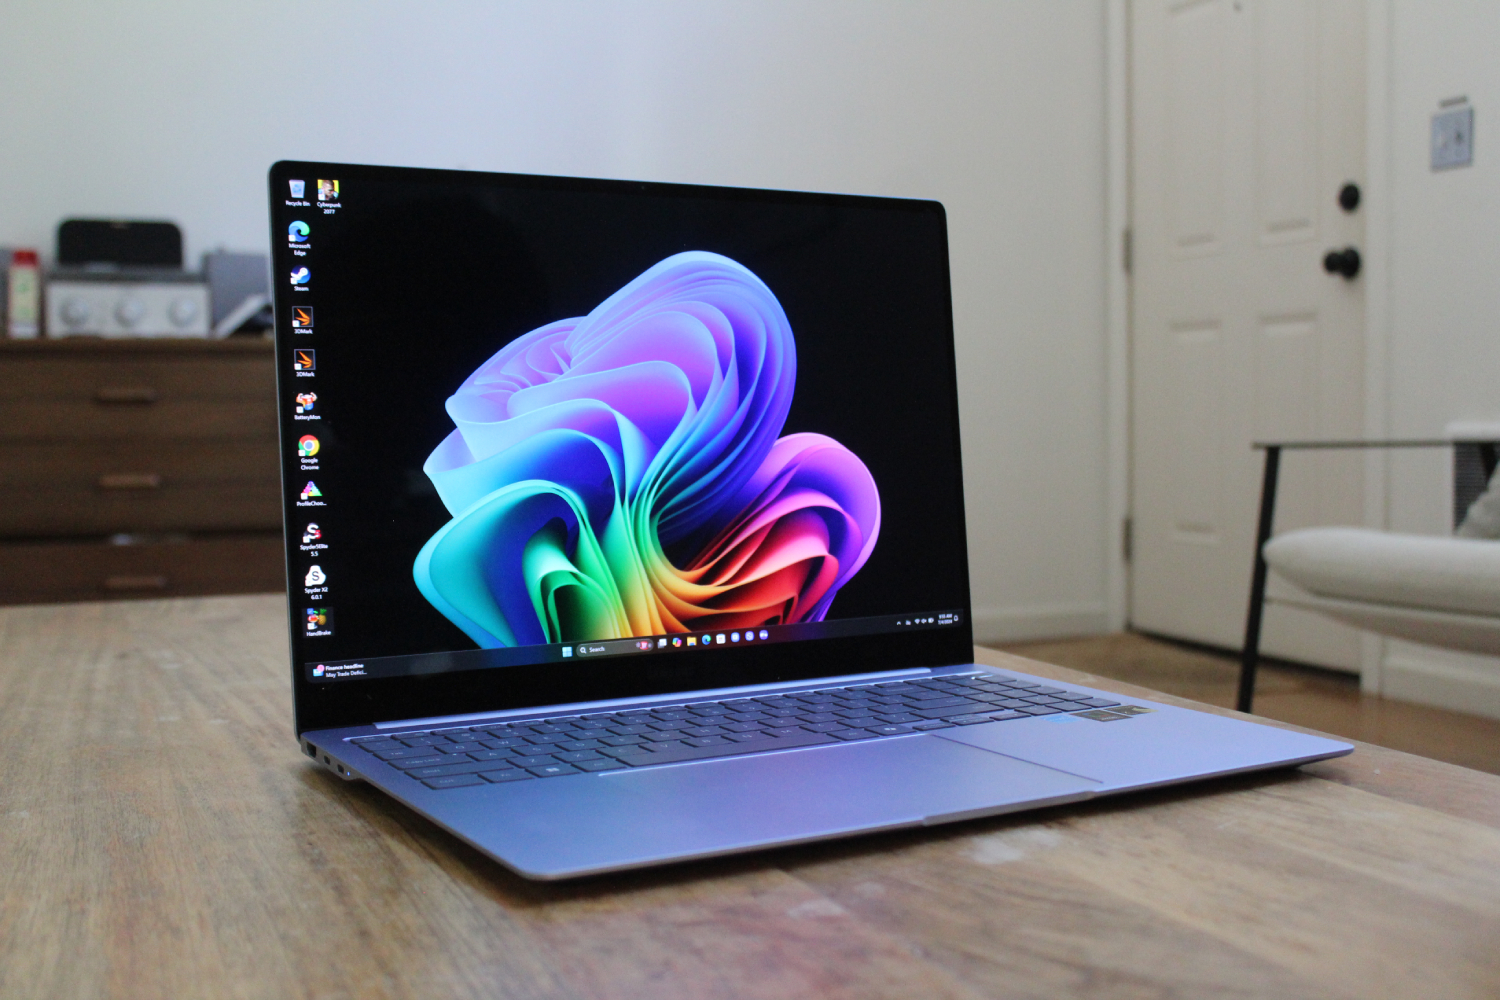 The screen showing on the Galaxy Book4 Edge.